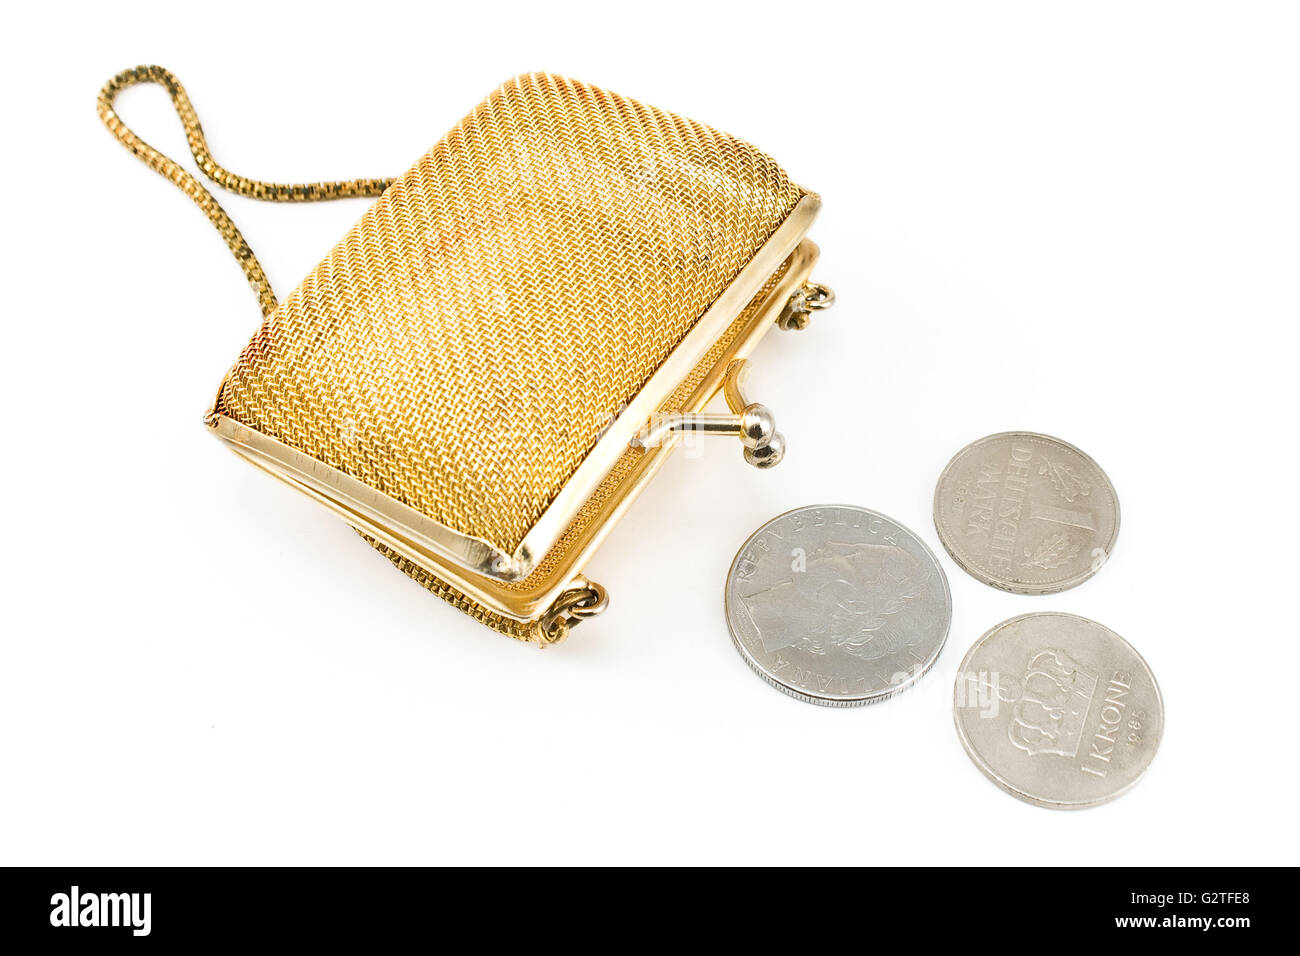 Golden purse with old european coins isolated on white Stock Photo